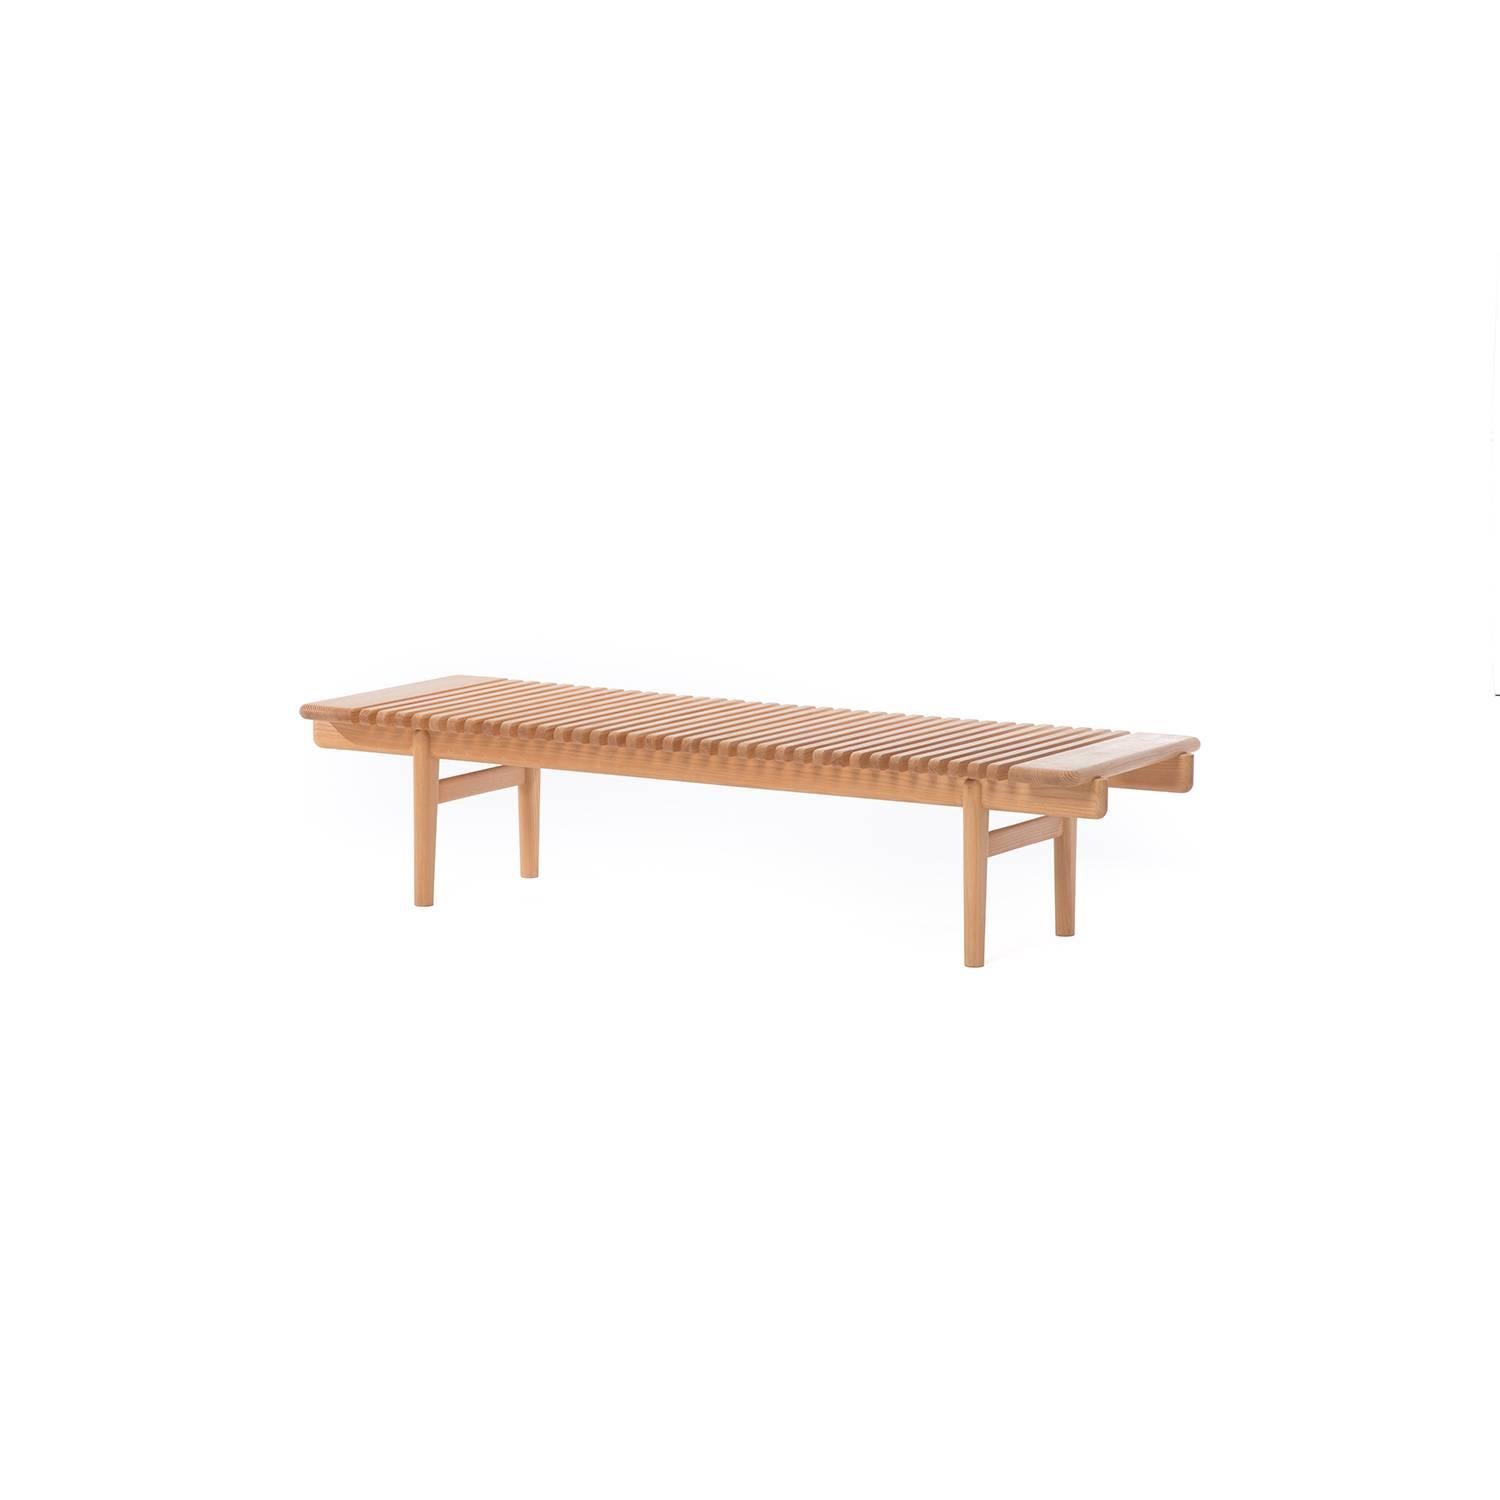 This classic Hans Wegner bar bench in ash is a standout piece that can function as a bench, or as a coffee table.